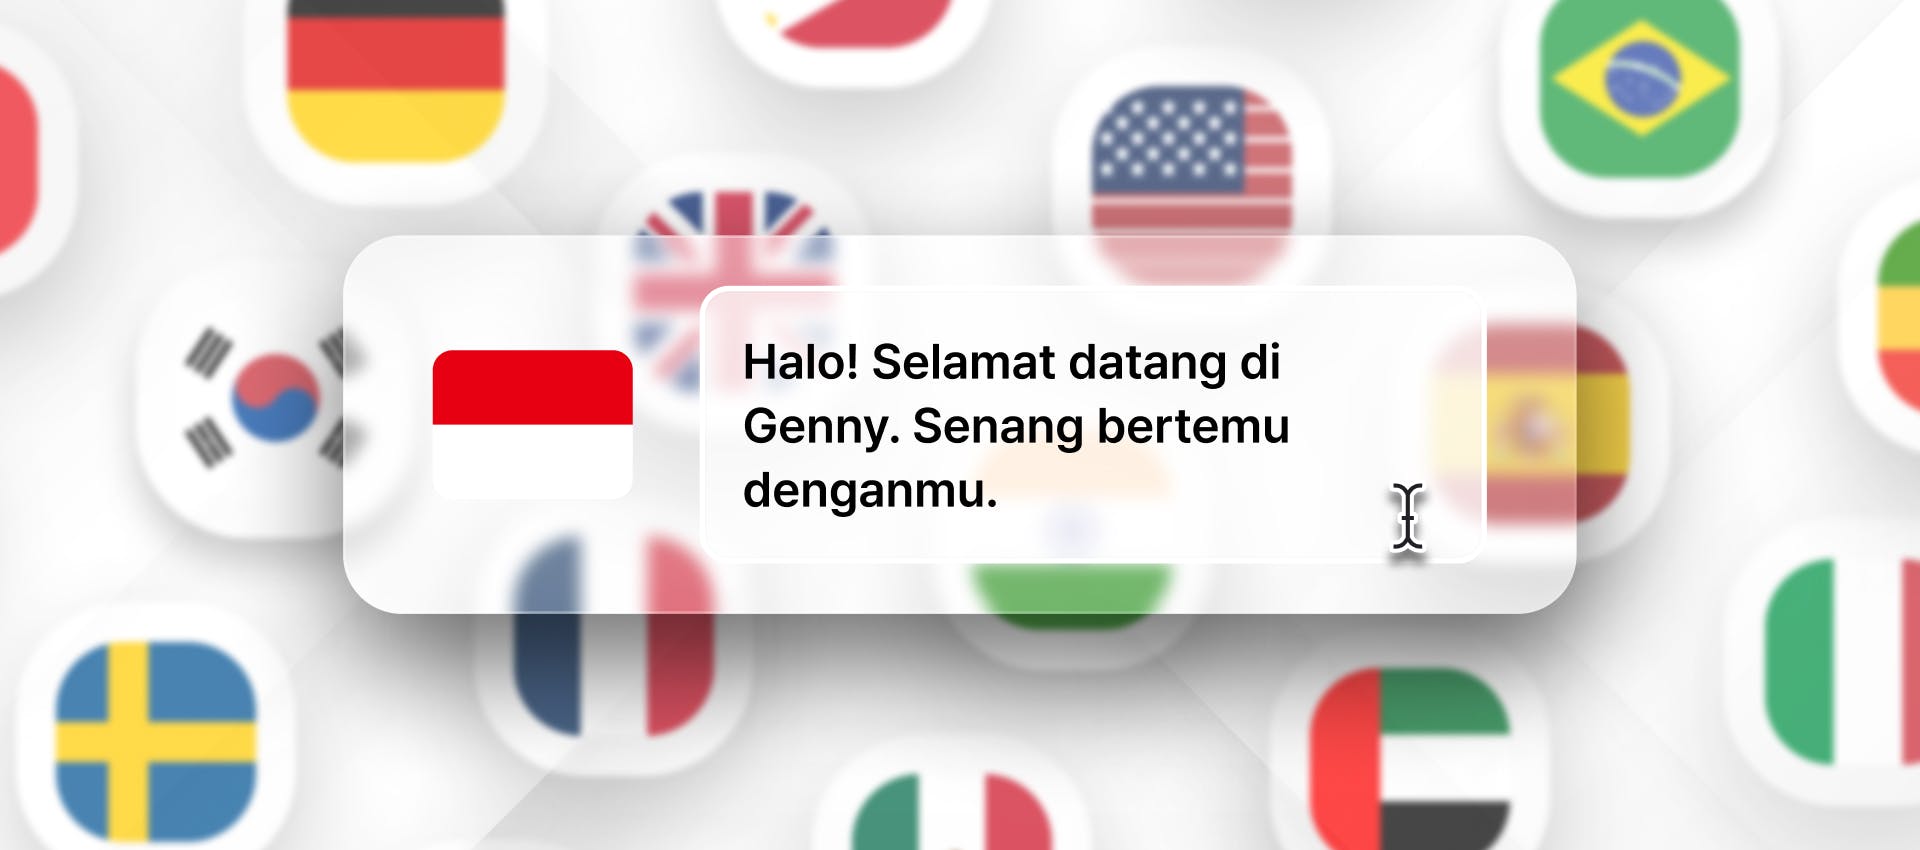 Indonesian phrase with background covered in flags